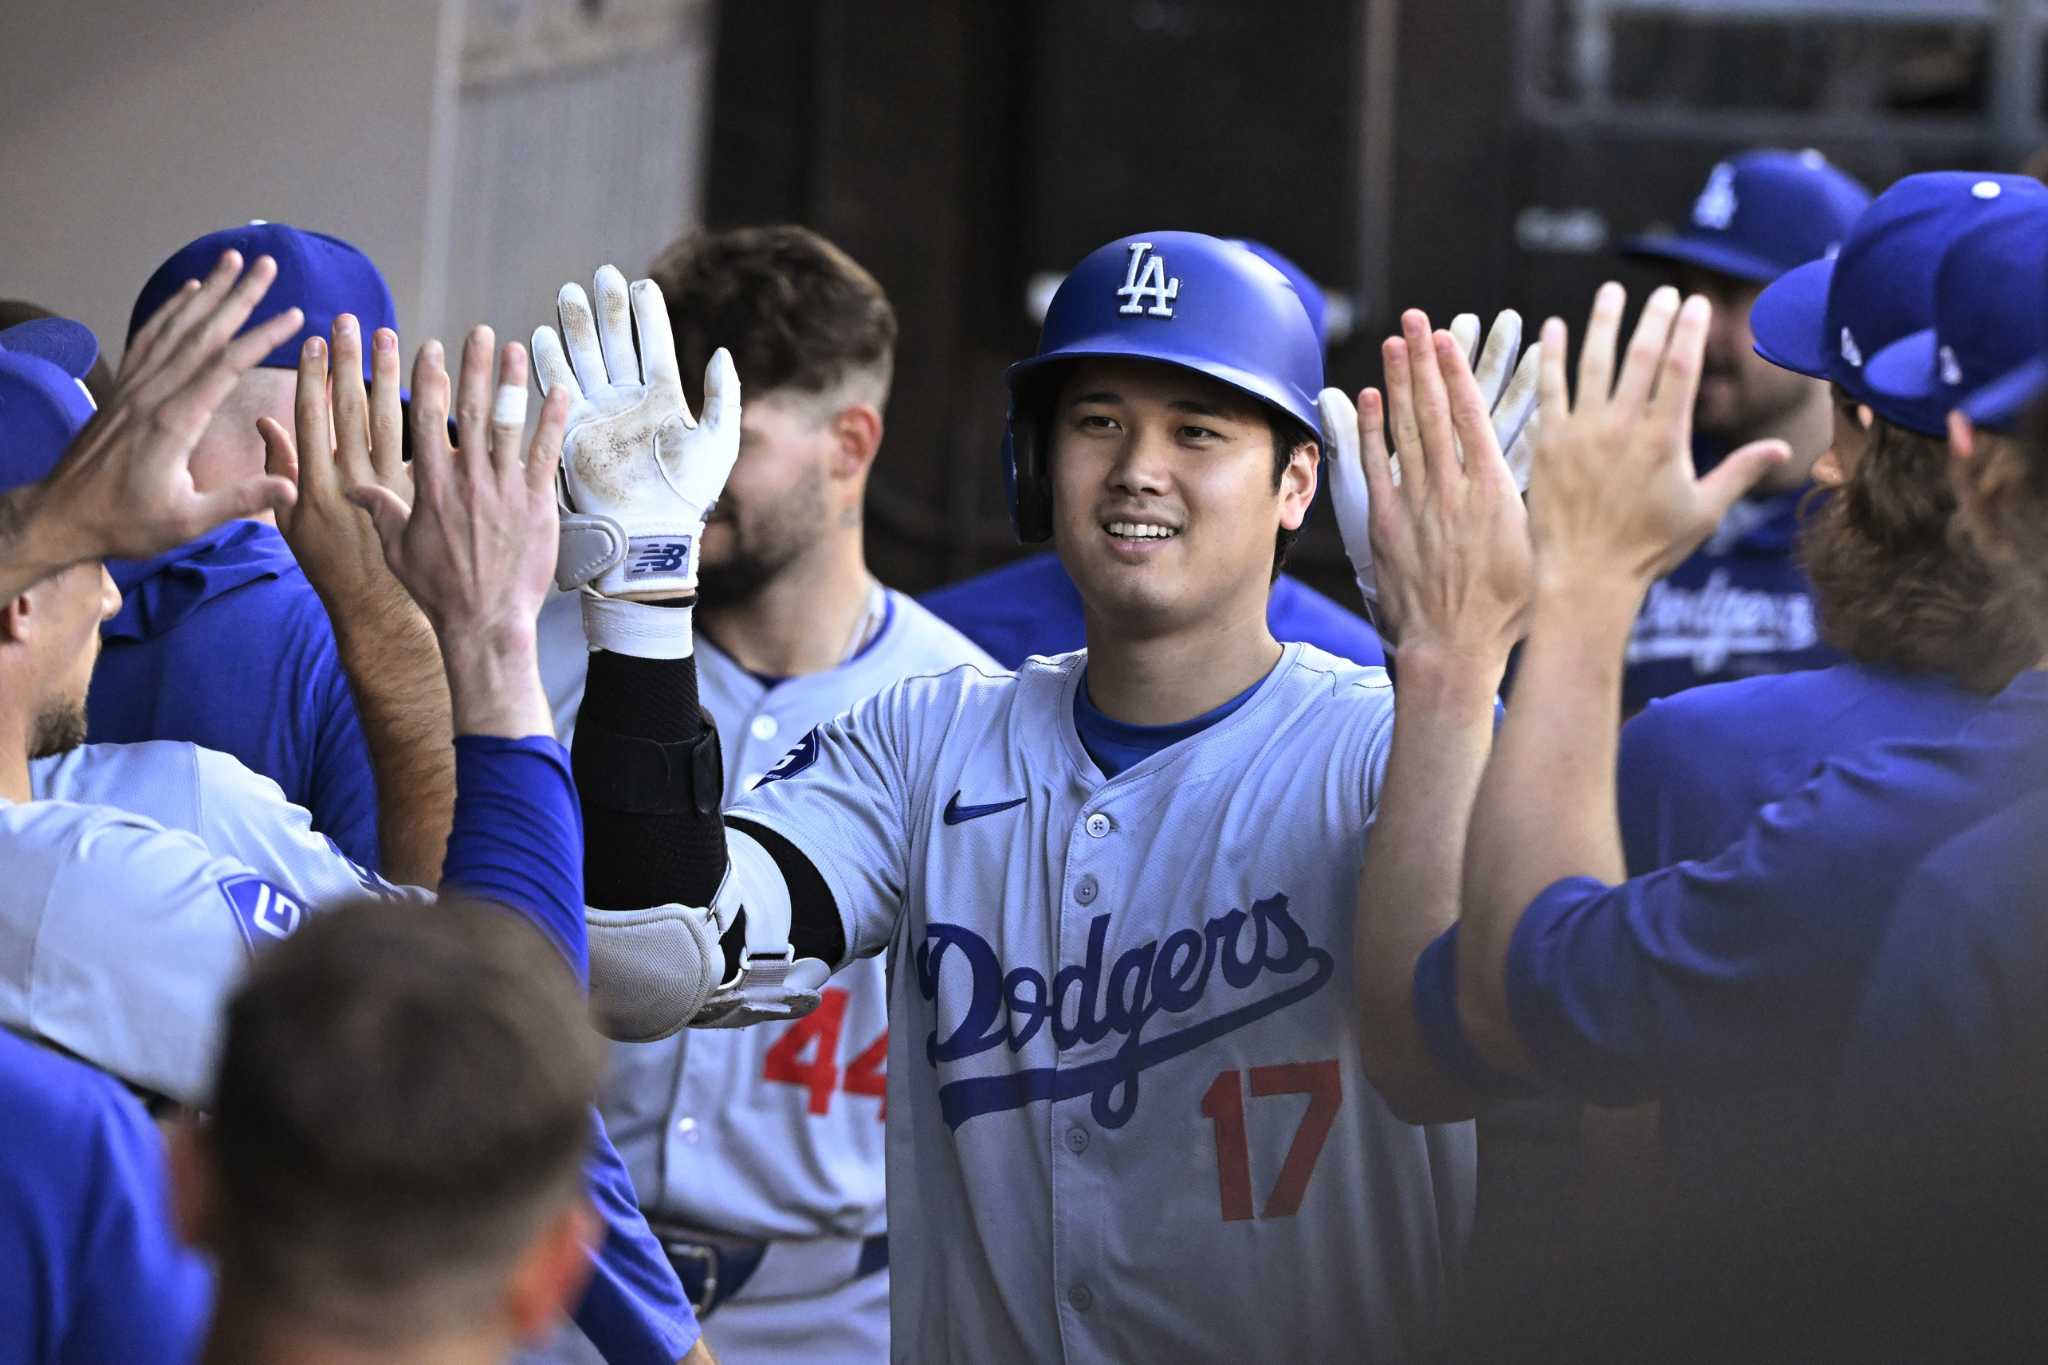 Ohtani hits another leadoff homer for Dodgers and extends RBI streak to a franchise-record 10 games